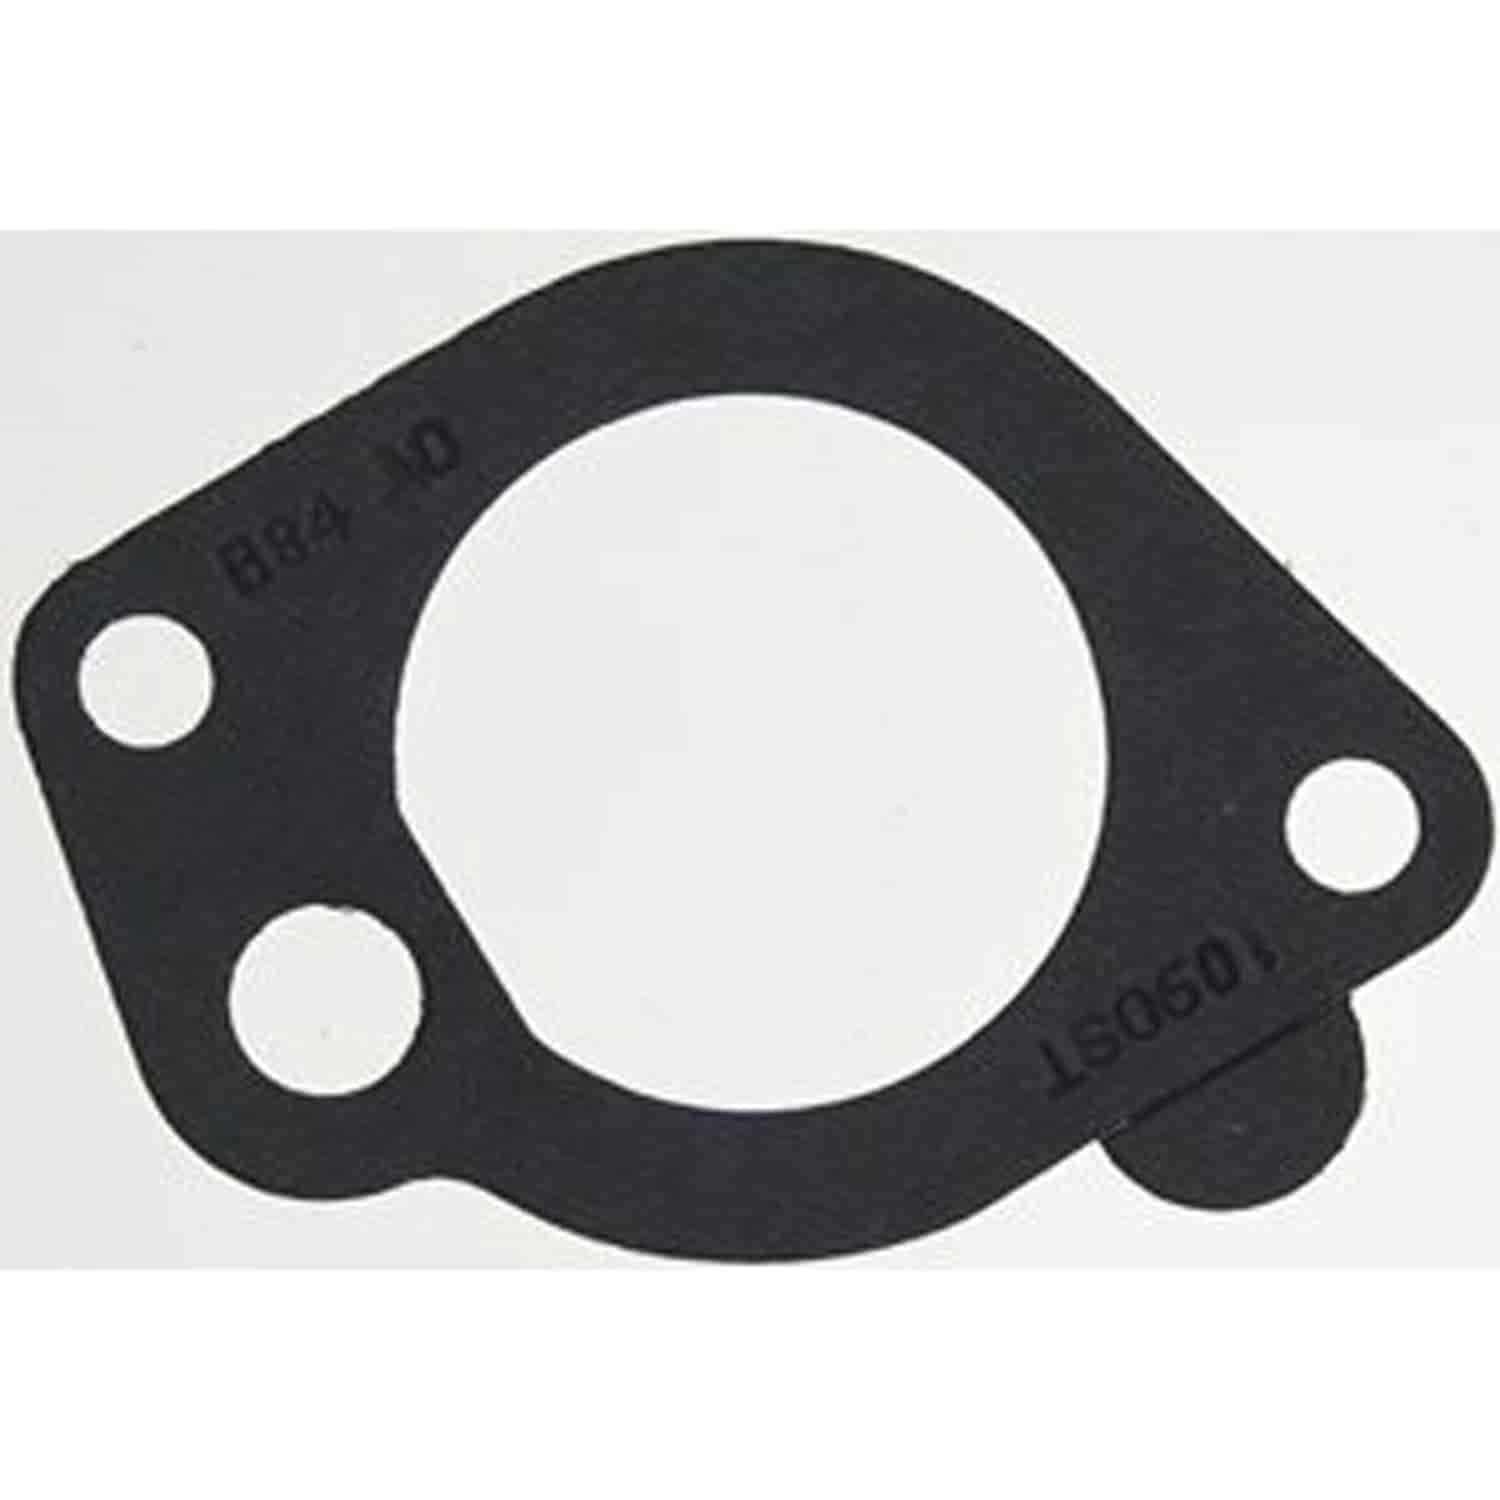 Thermostat Gaskets 1.9"